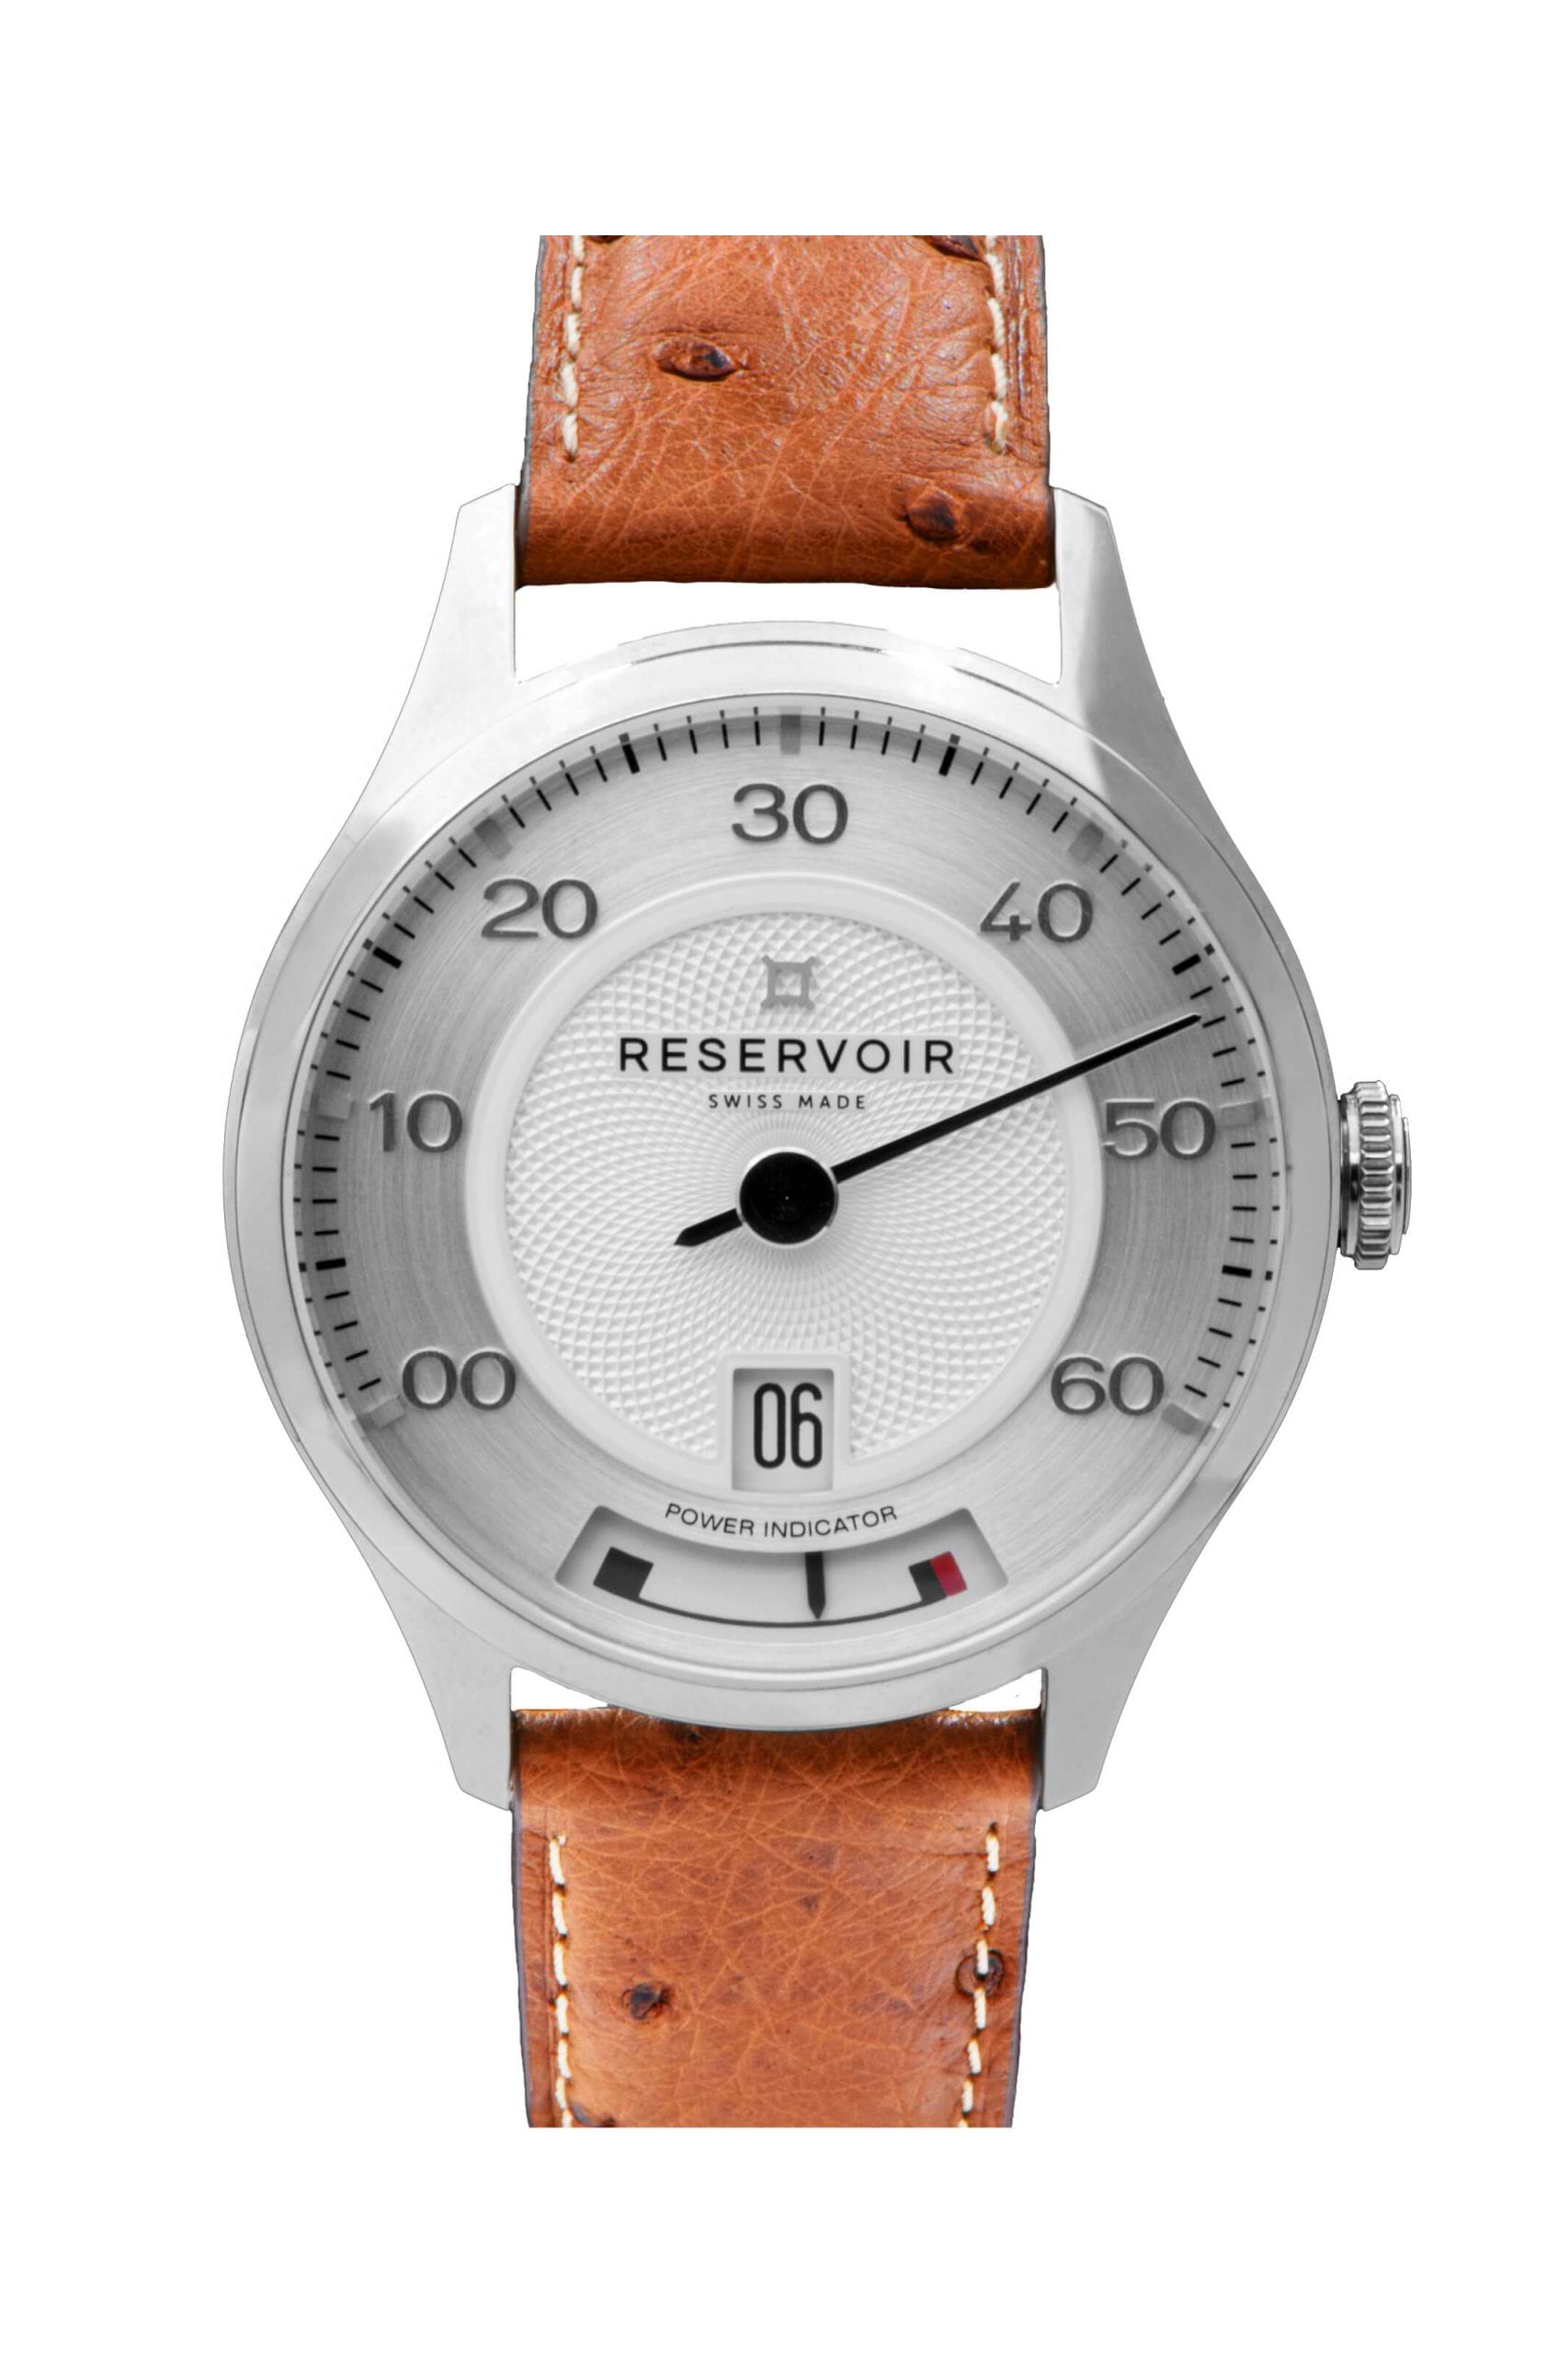 Luxury 356 Porsche car watch with guilloche pattern in light taupe, Black, and dark rust.